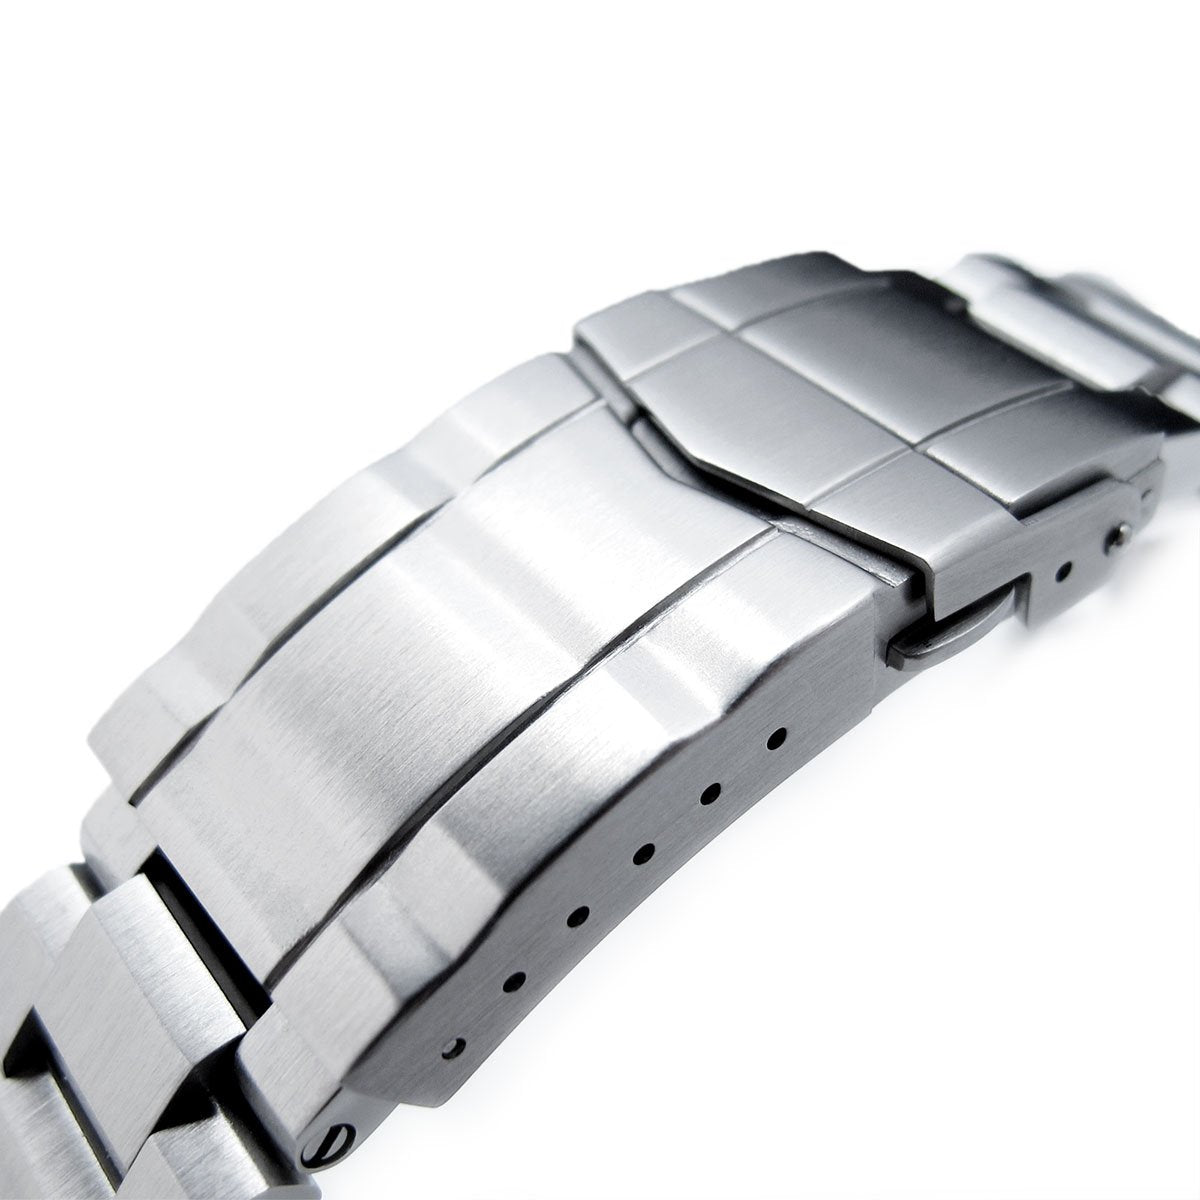 22mm Hexad 316L Stainless Steel Watch Band for Seiko Samurai SRPB51 SUB Diver Clasp Strapcode Watch Bands